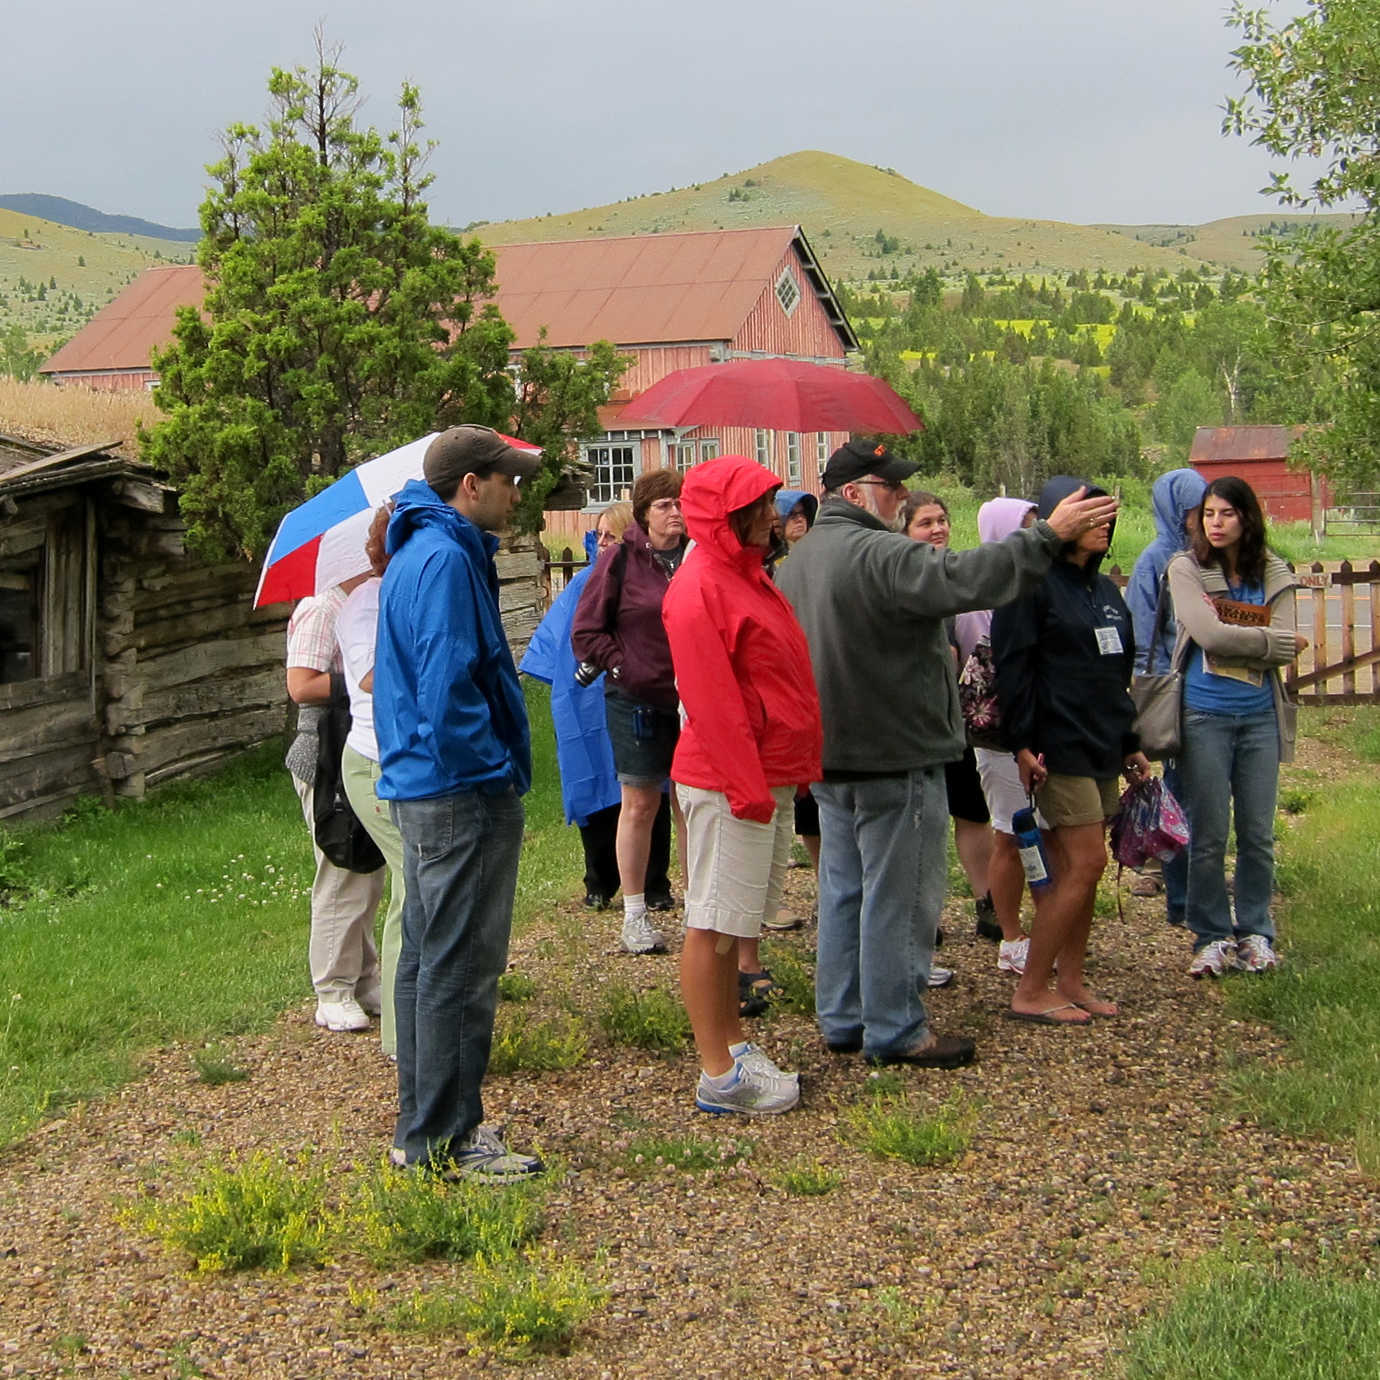 Teachers participate in a tour. Image courtesy of the Montana Historical Society.